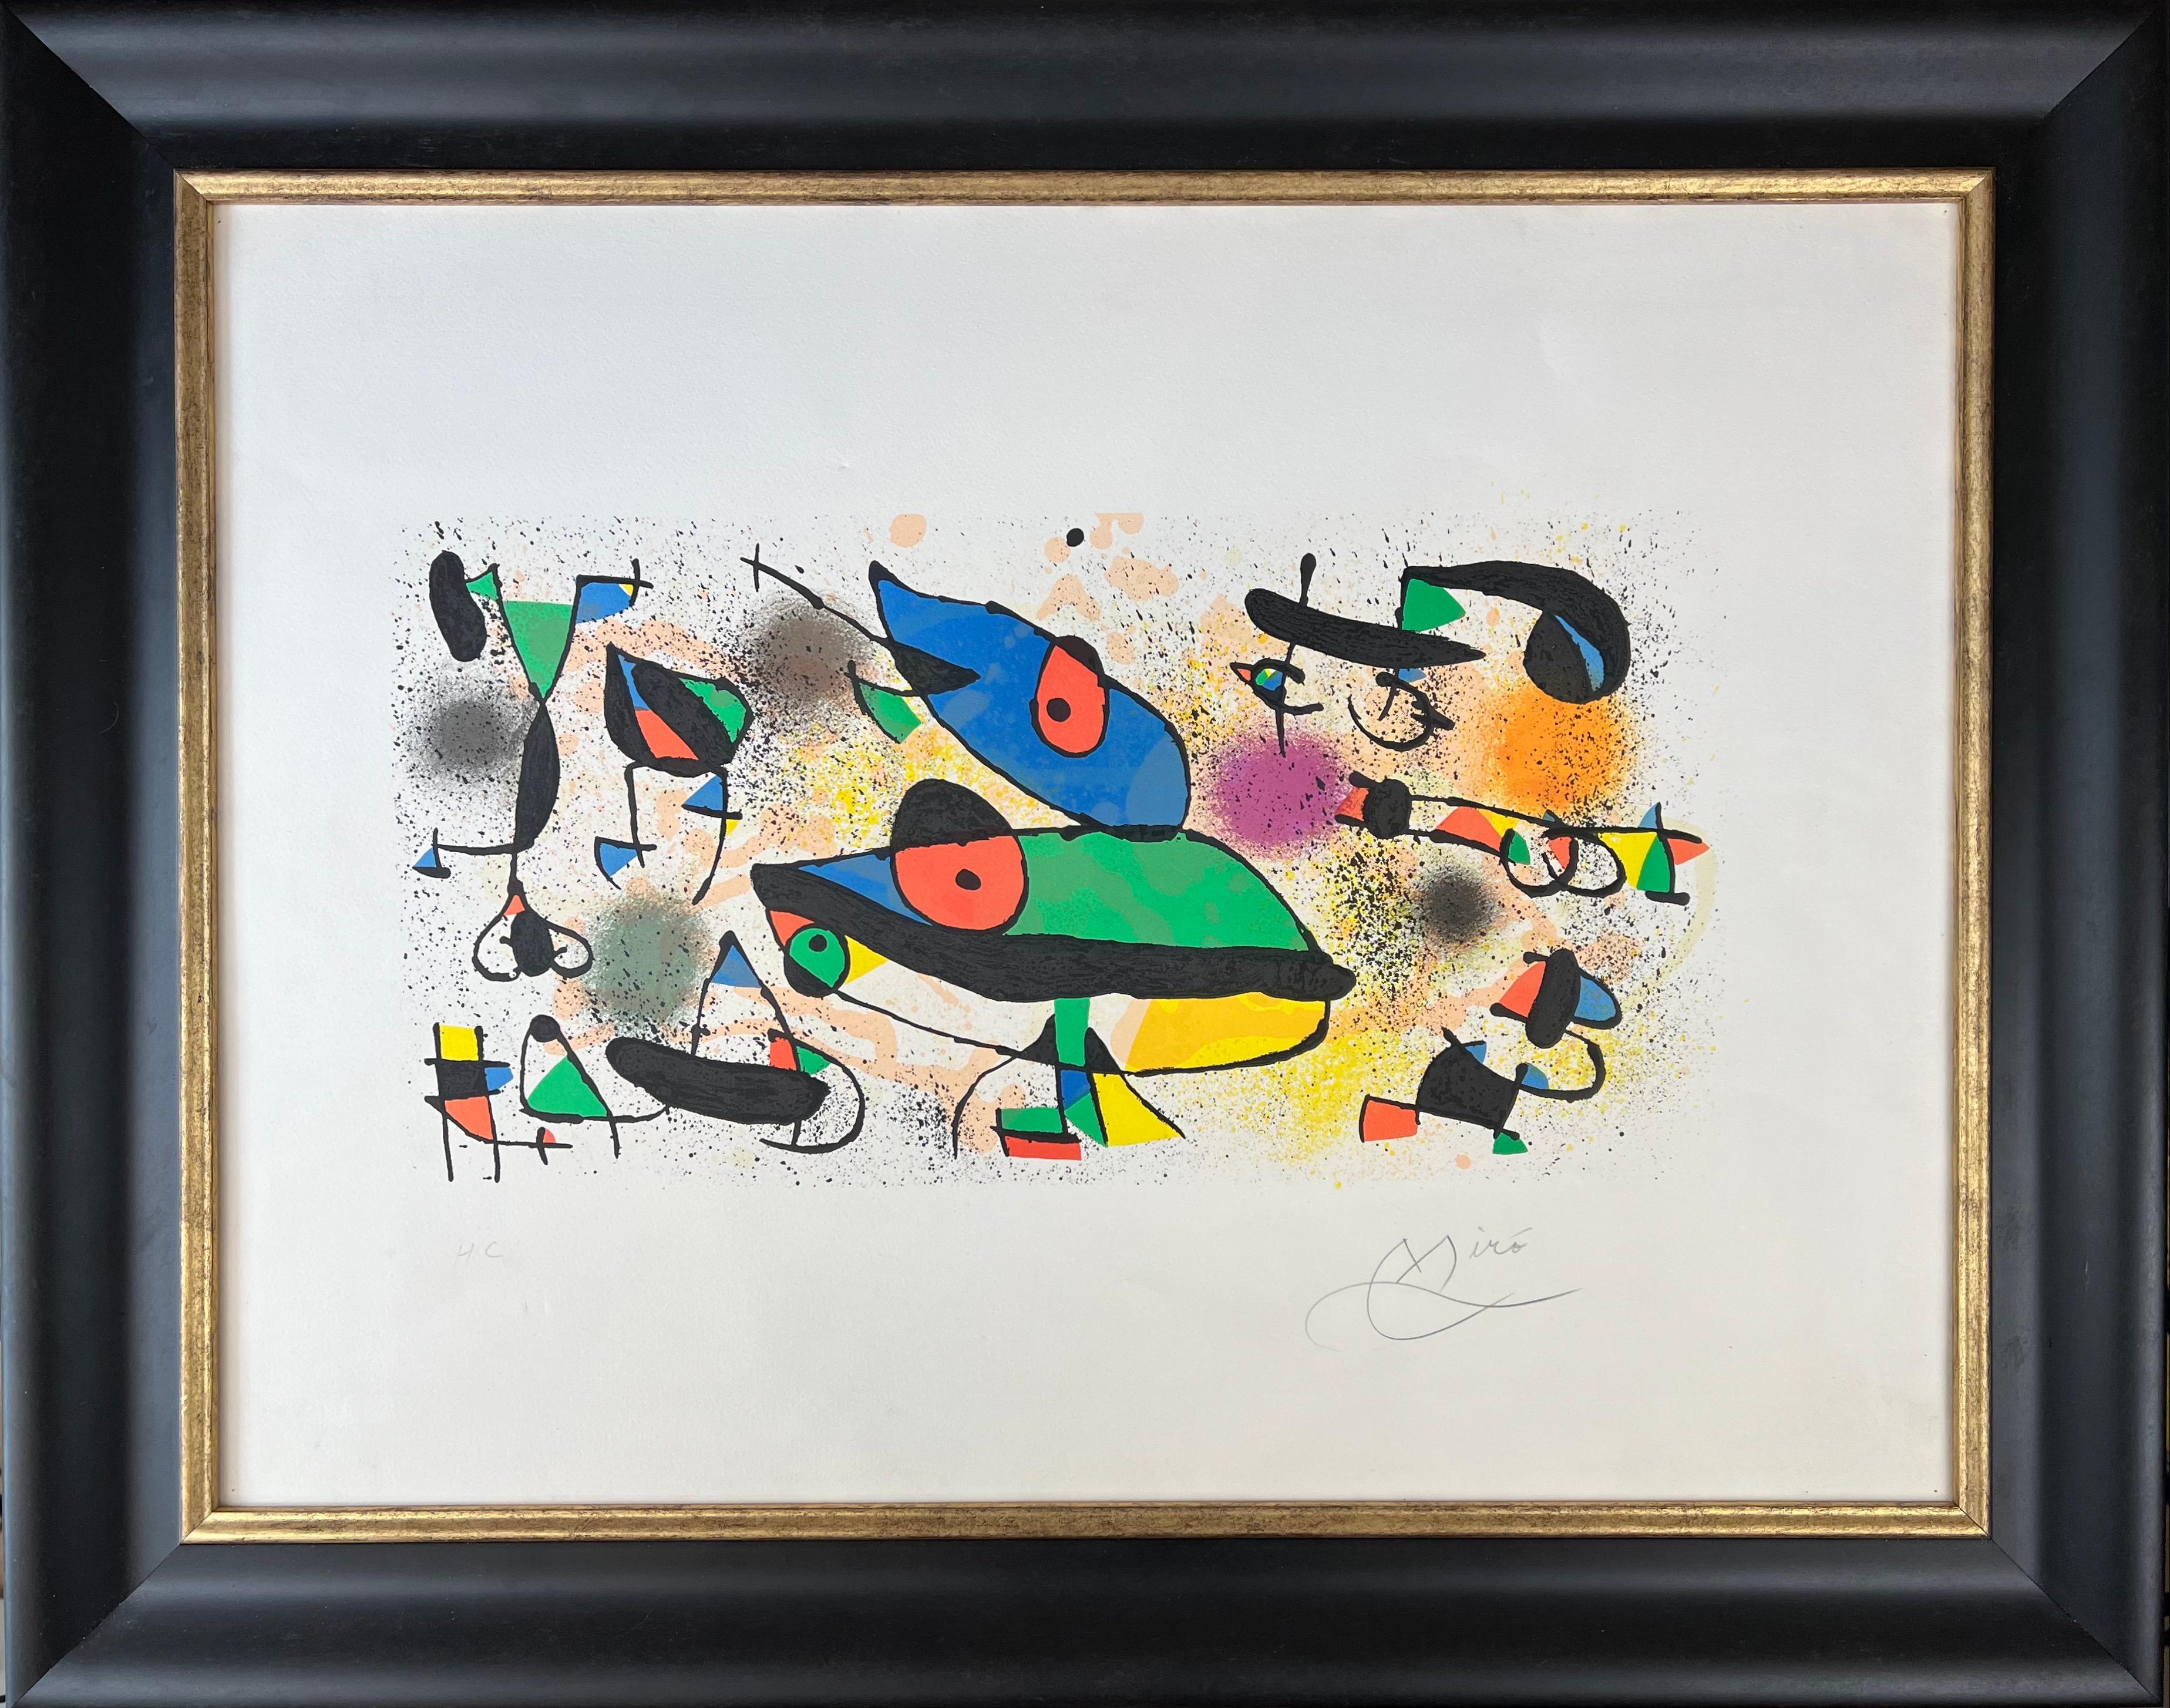 Color Lithograph on Arches paper, edited in 1980
Limited edition of 100 copies
signed in pencil by artist in lower right corner and numbered as HC ( hors commerce )  in lower left corner
Published by Maeght Editeur, Paris
Paper size: 57 x 75,7